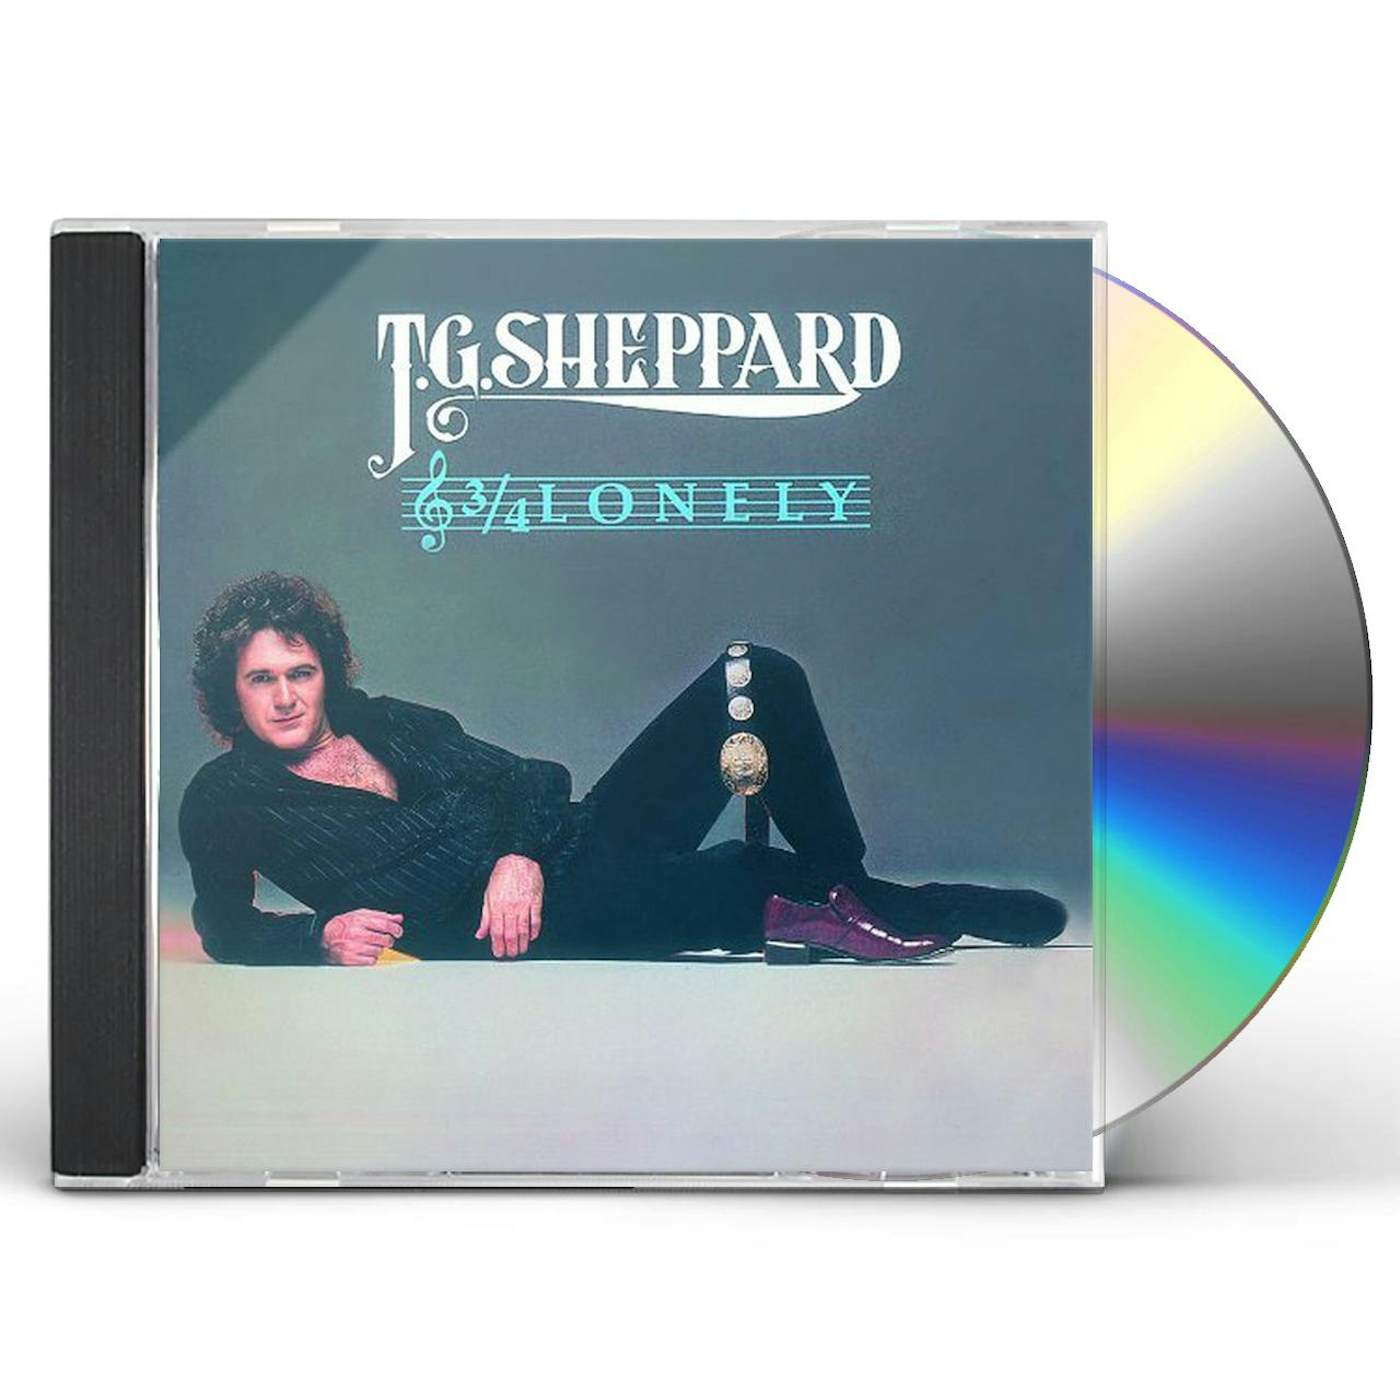 T.G. Sheppard 3/4 LONELY CD